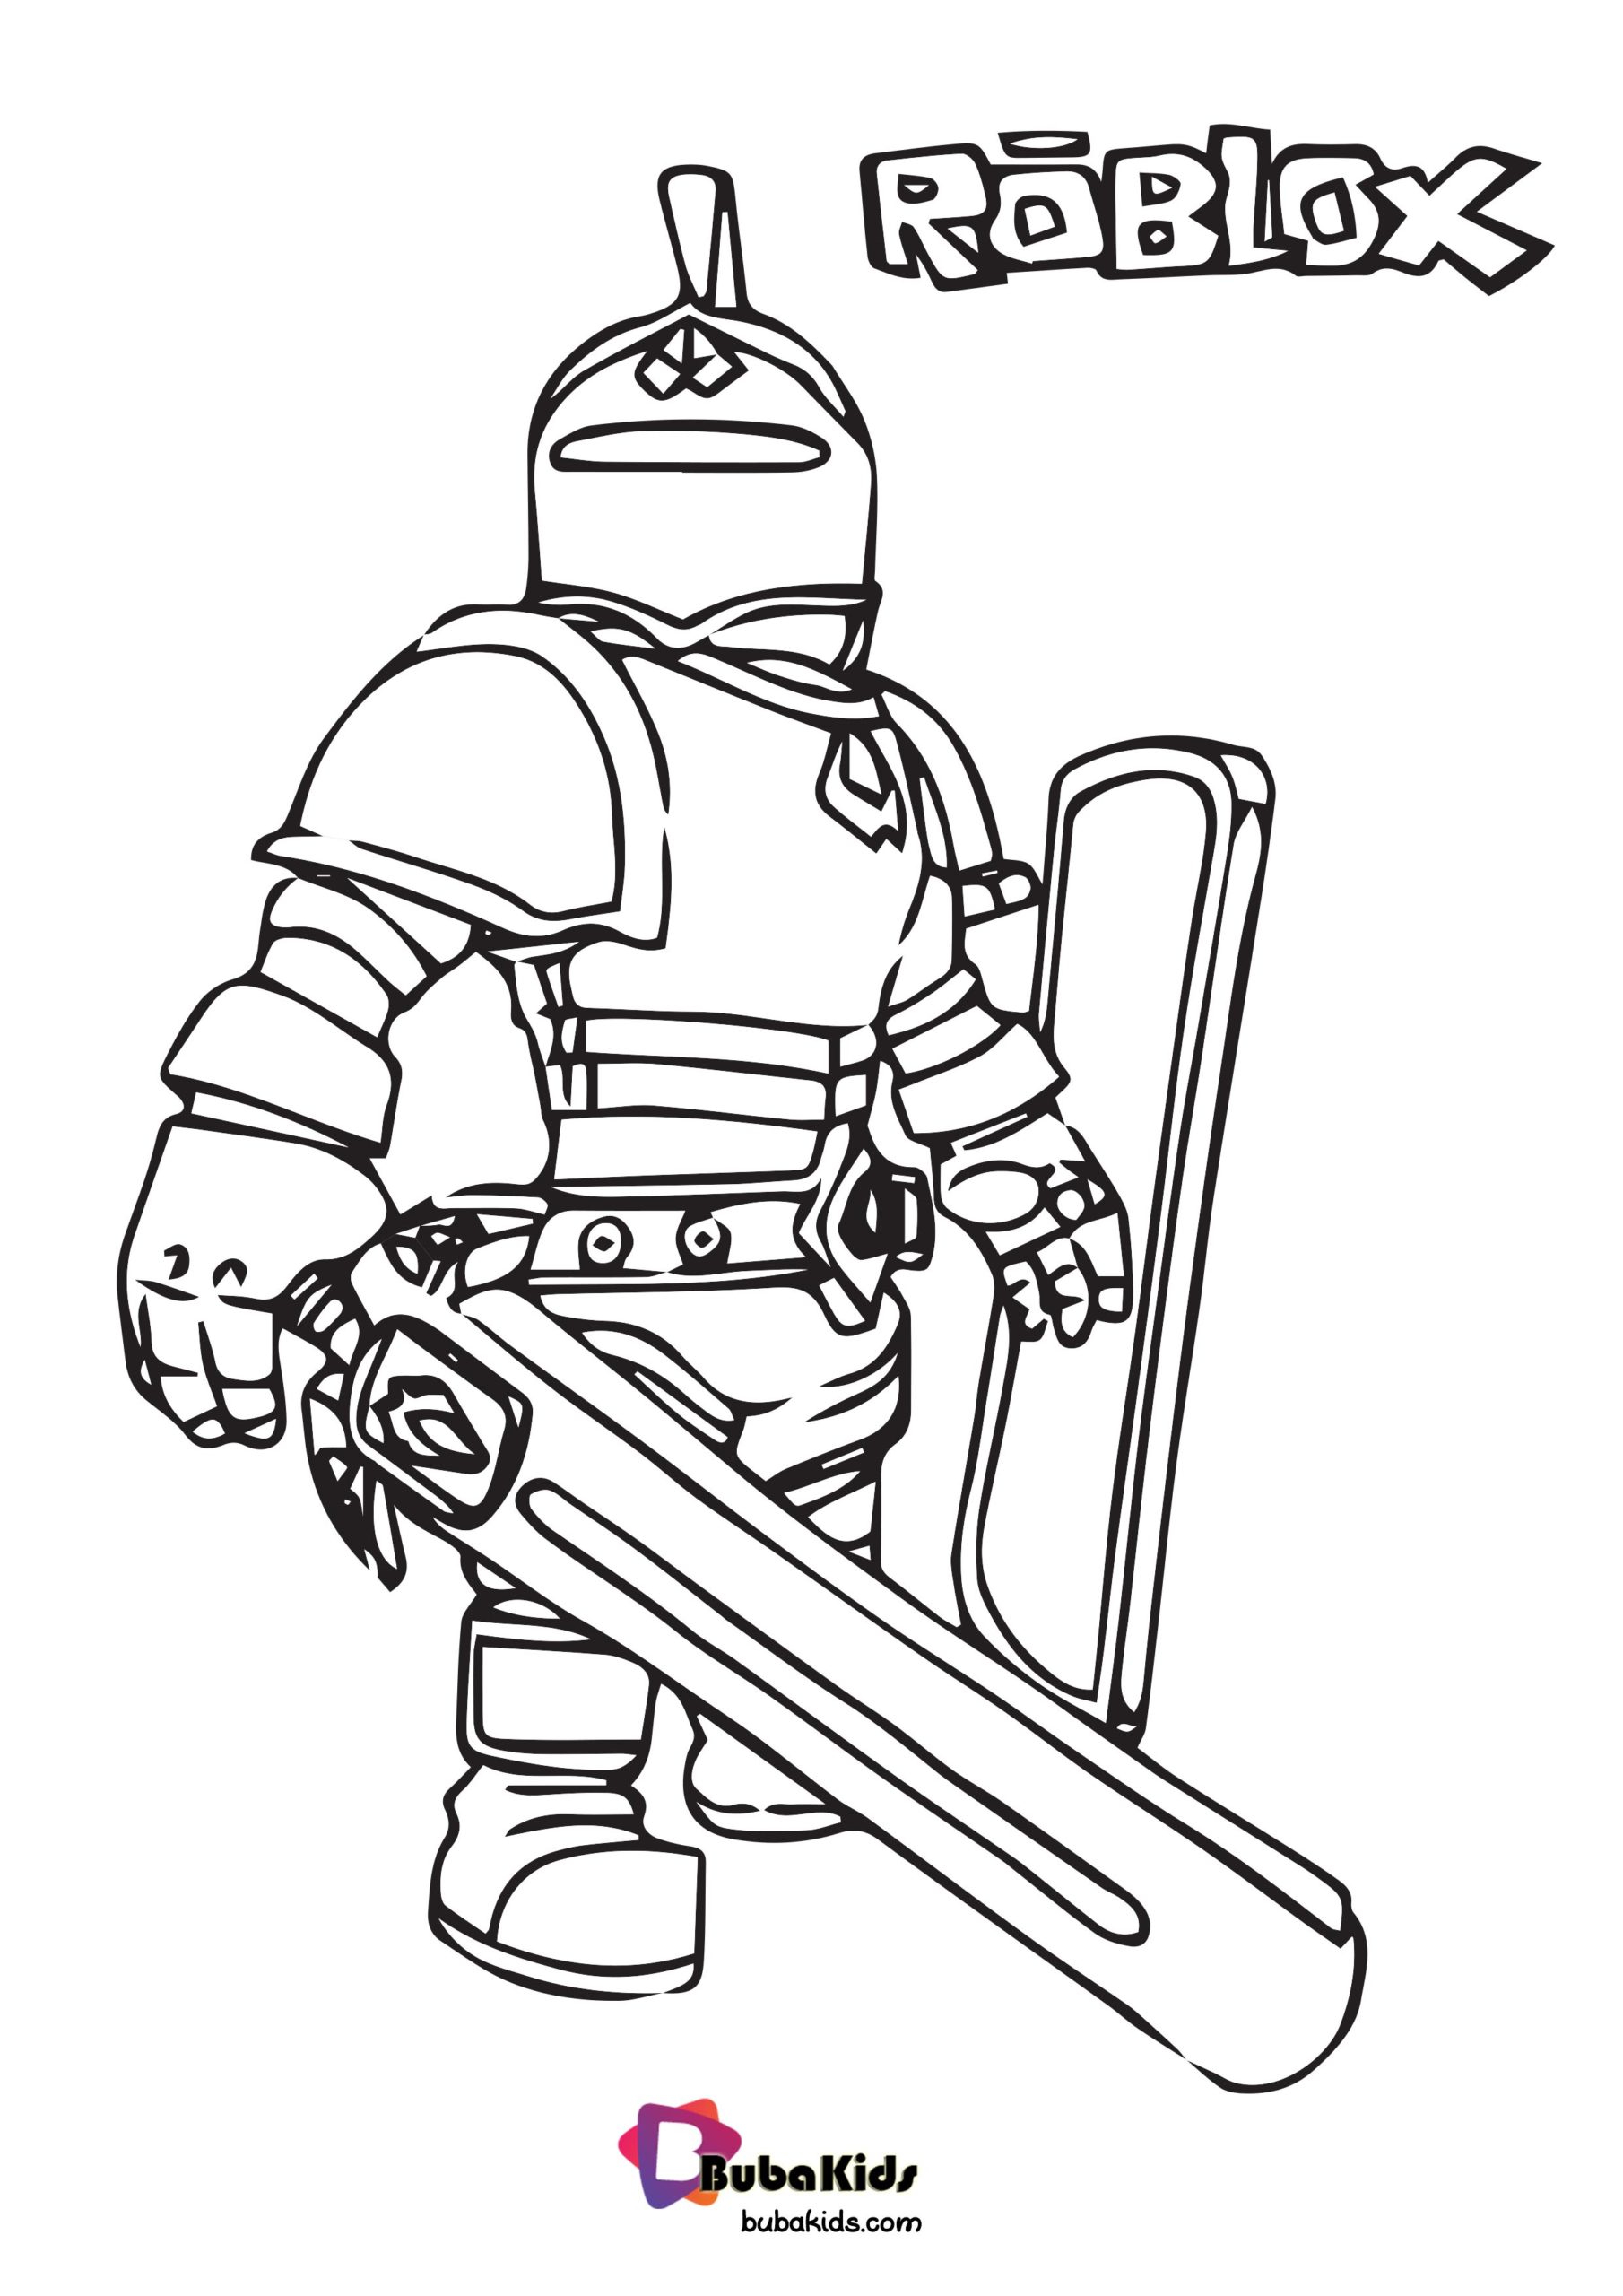 Warrior Roblox Free Coloring Page Wallpaper